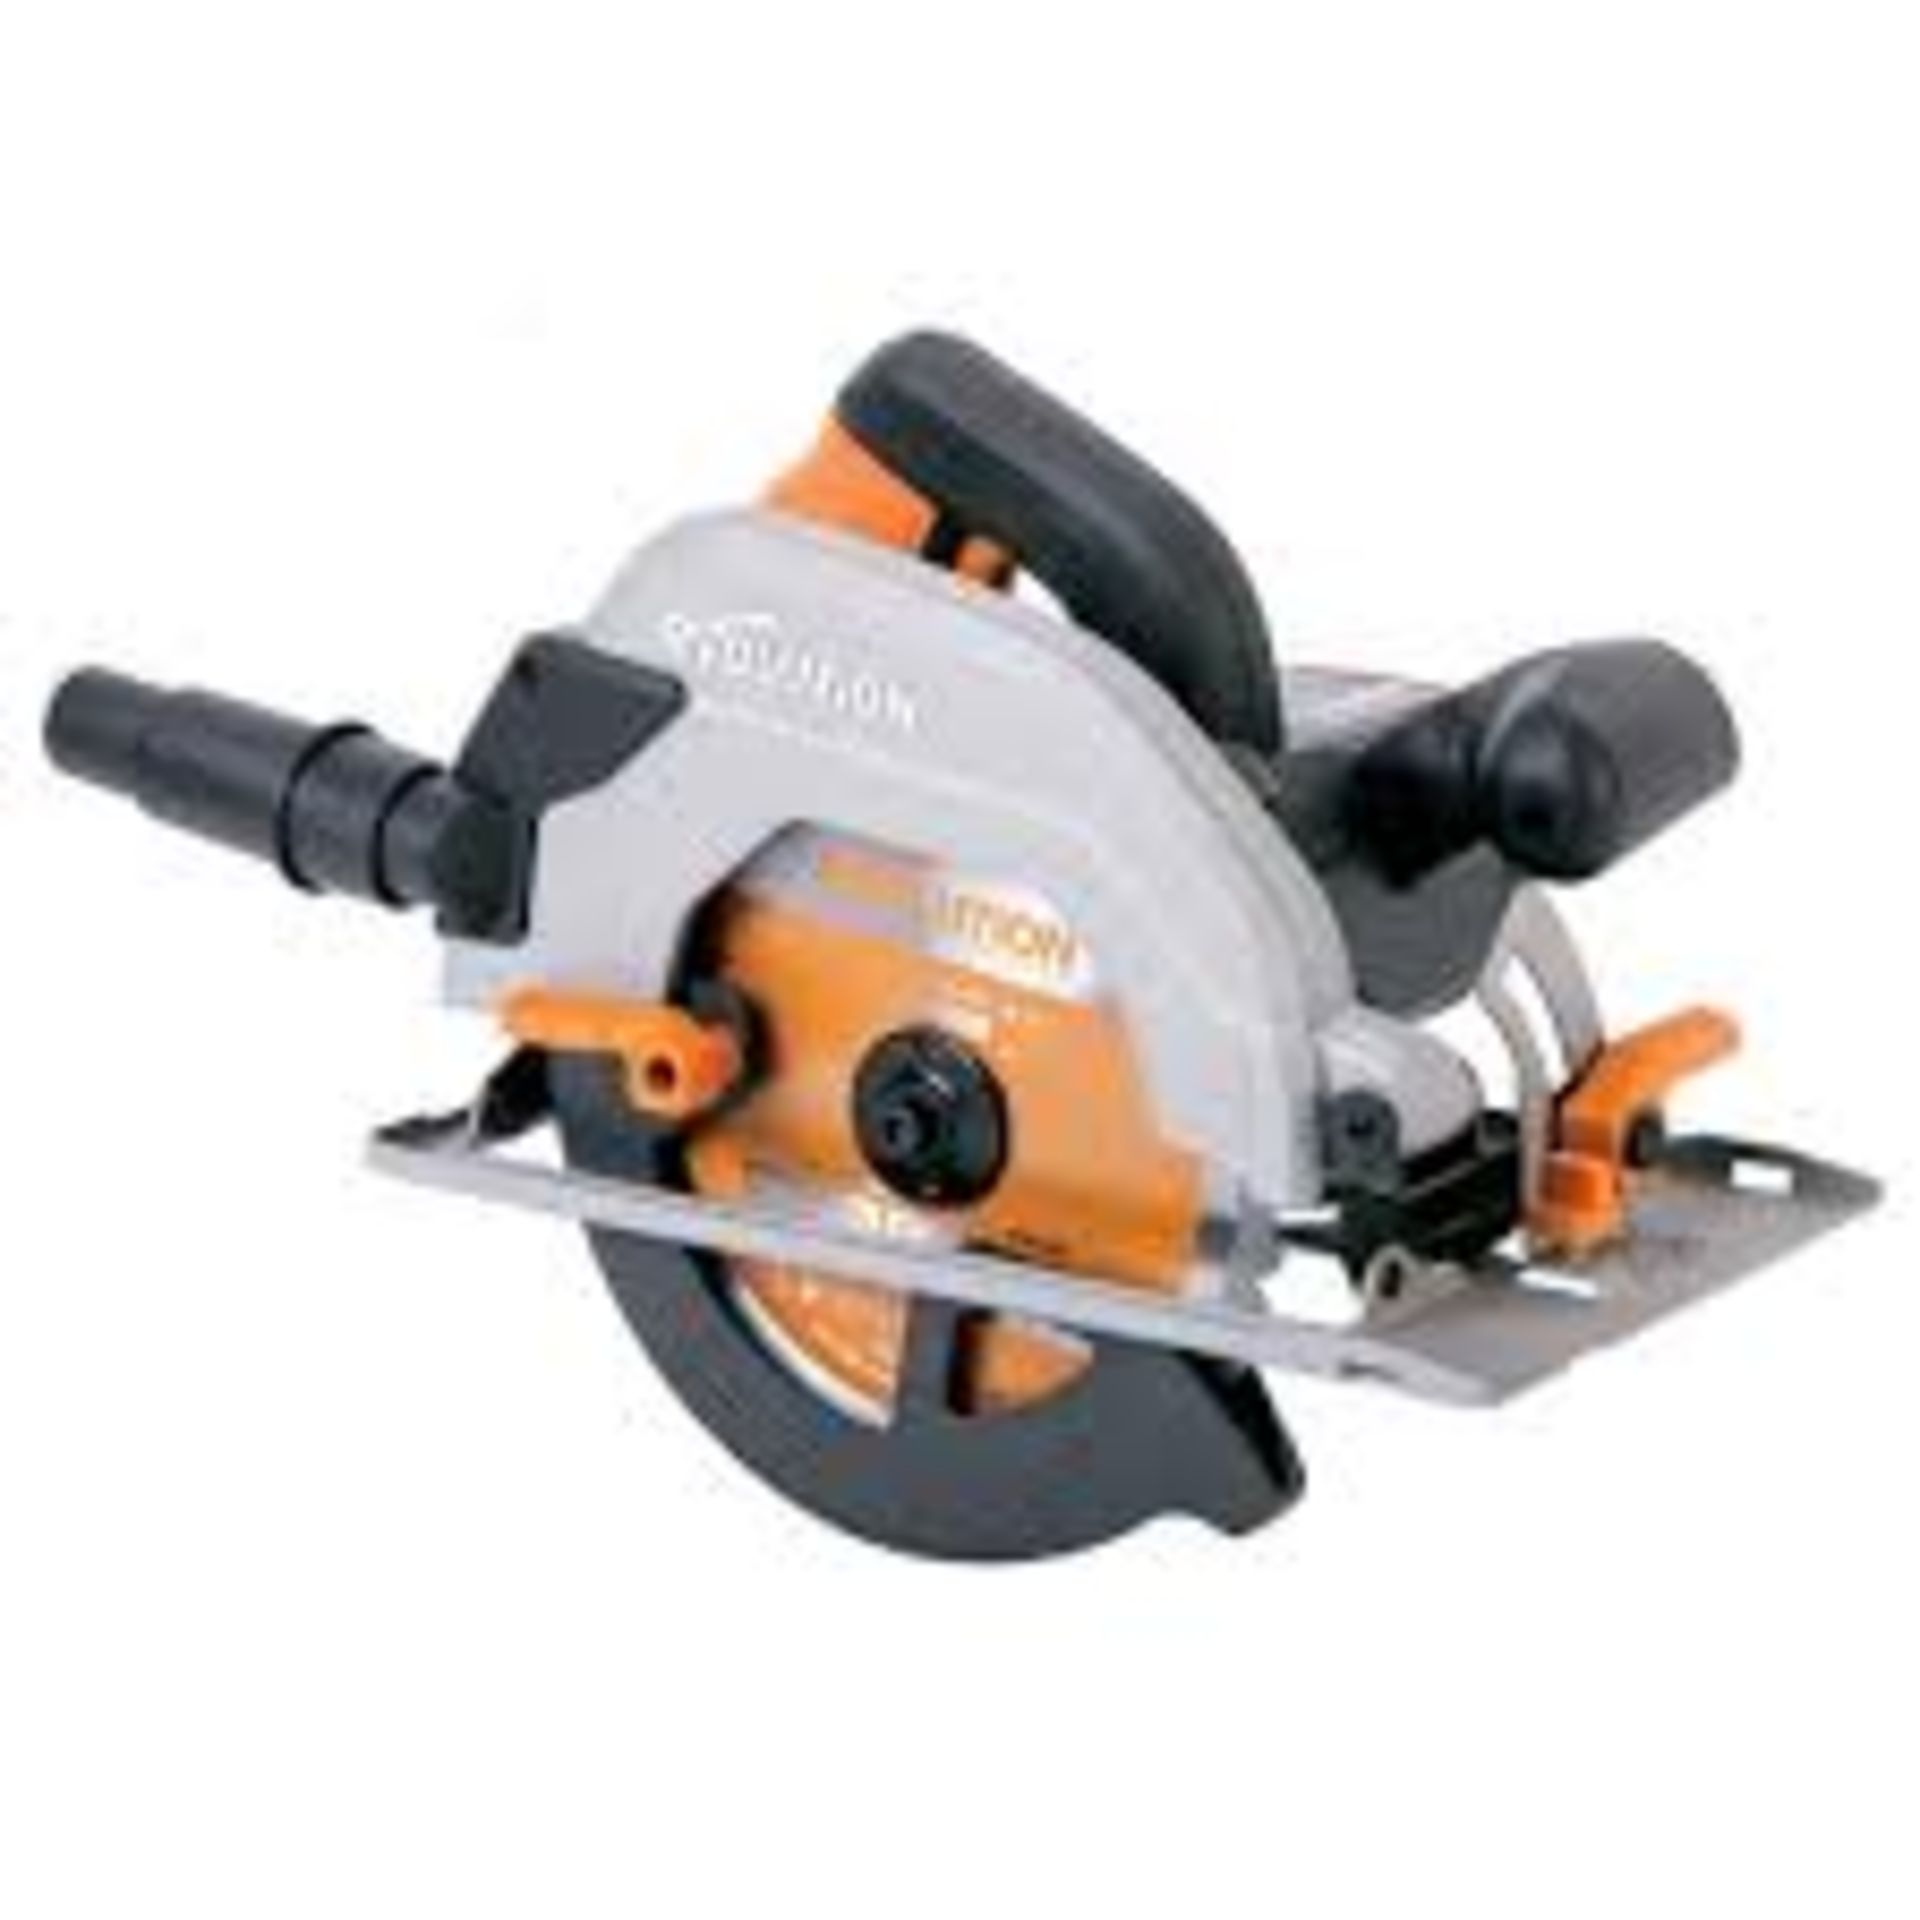 Evolution R185CCSL 185mm Circular Saw. - PW. The lightest of the 185mm circular saw models, it is